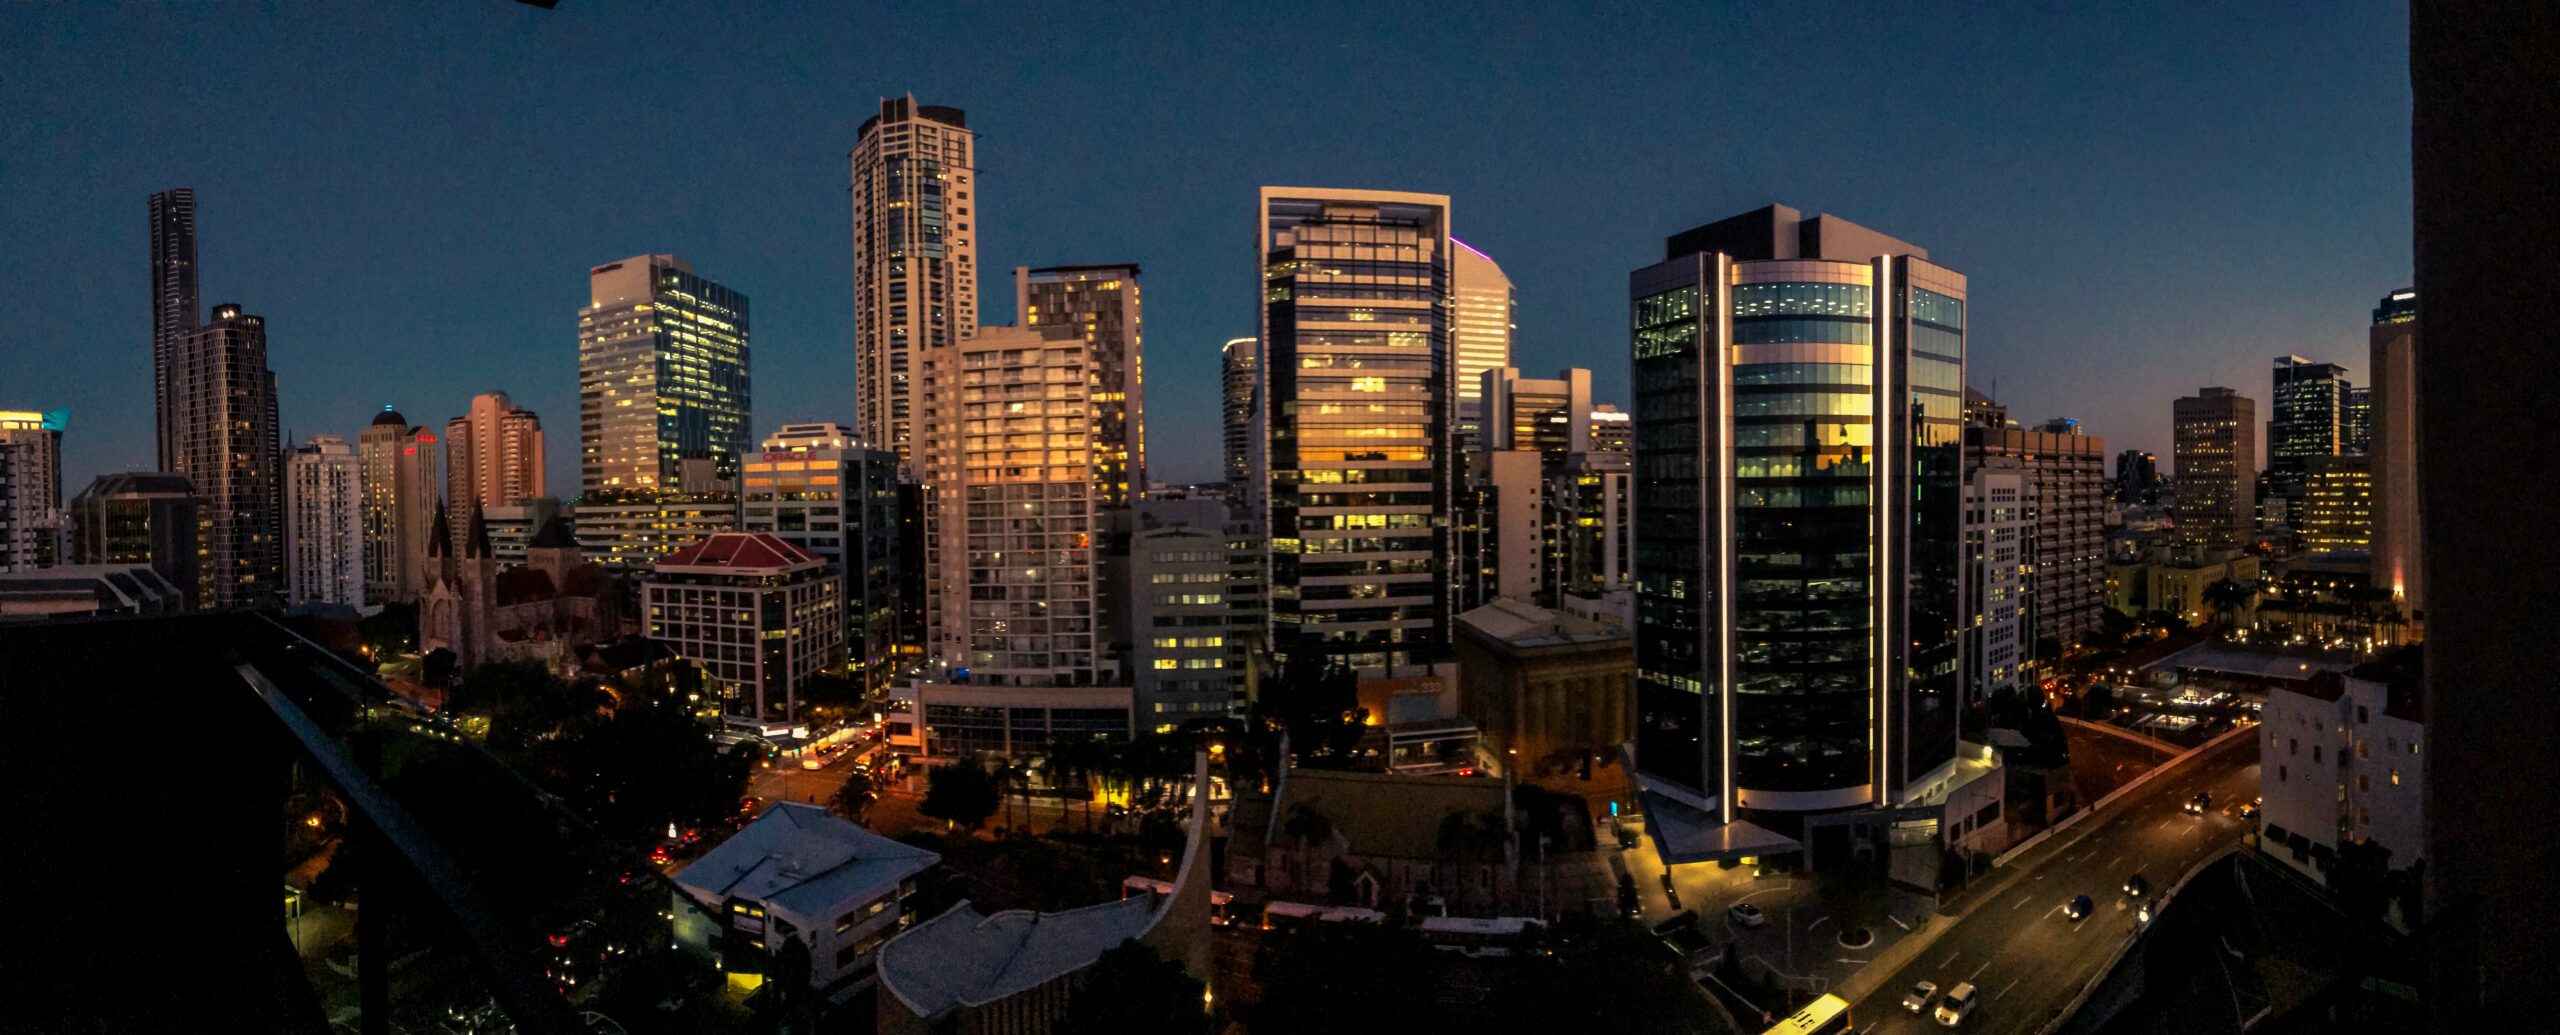 Image of the sunrise over the city of Brisbane in Australia | Smart cities